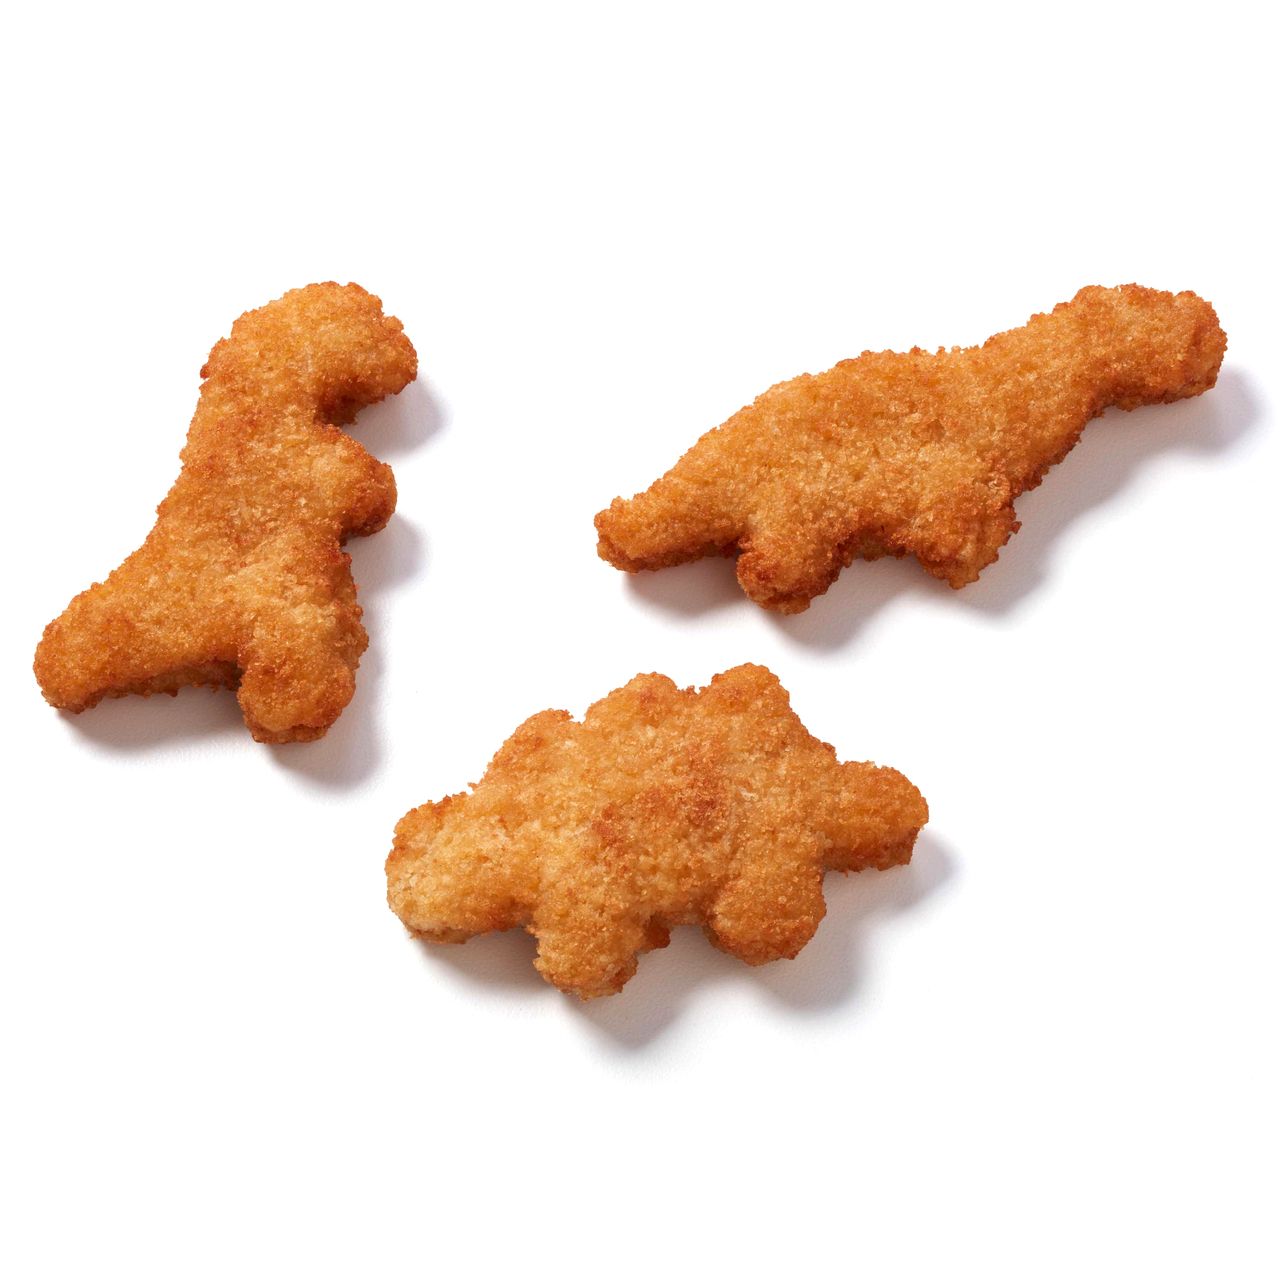 We Live in a Golden Age of Dinosaur Chicken Nuggets